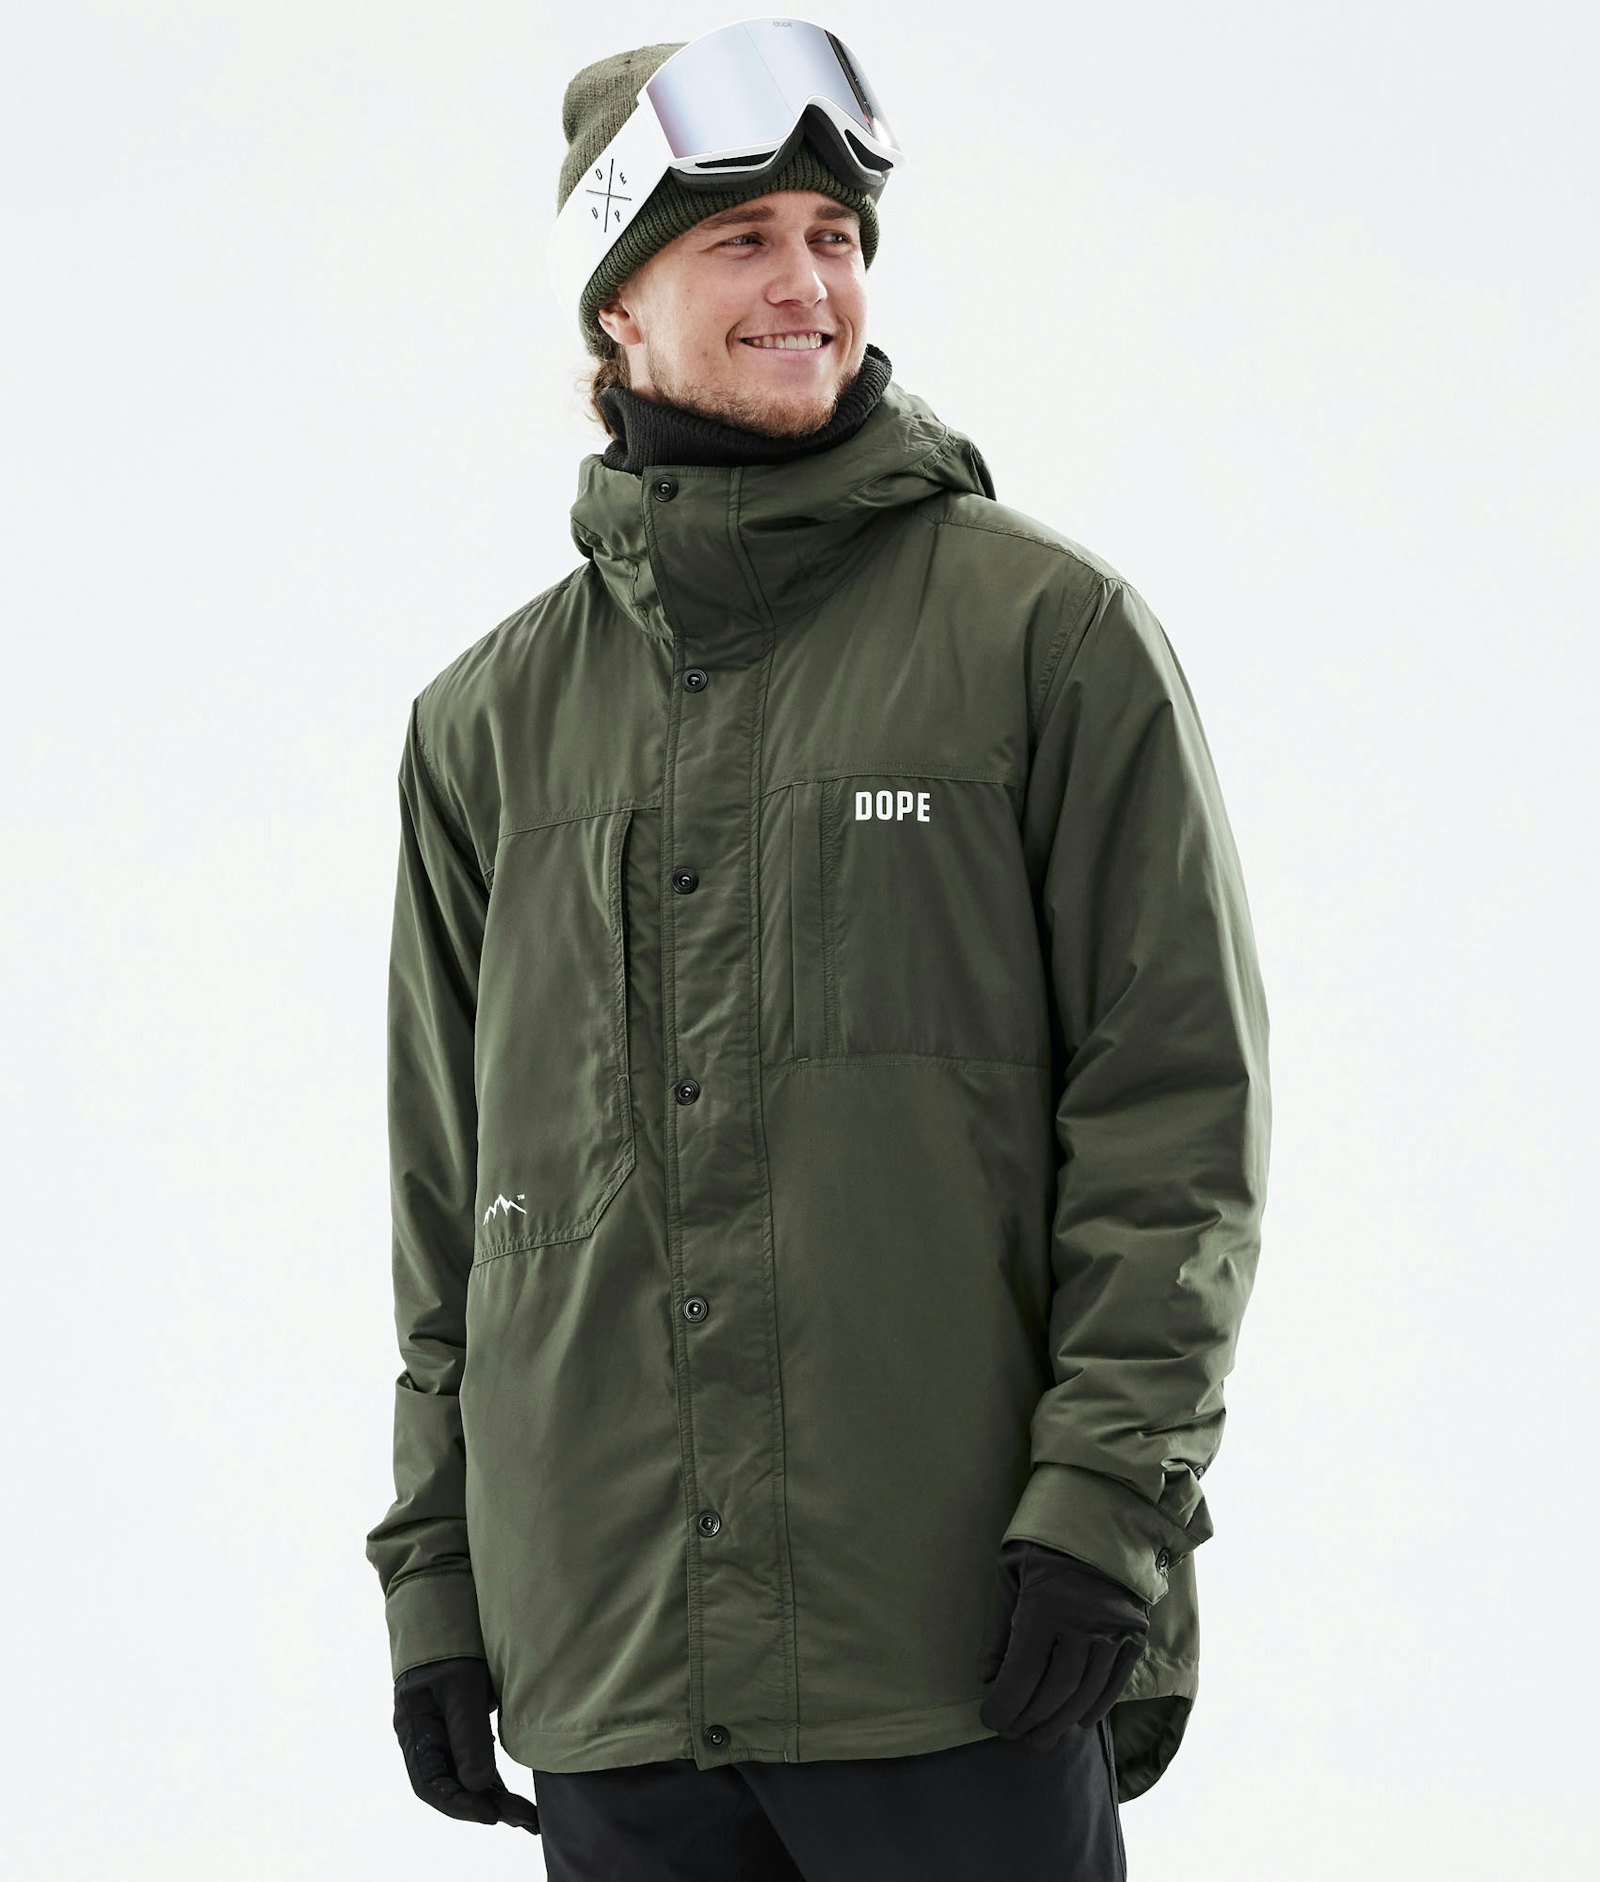 Dope Insulated Veste - Couche intermédiaire Homme Olive Green Renewed, Image 1 sur 12